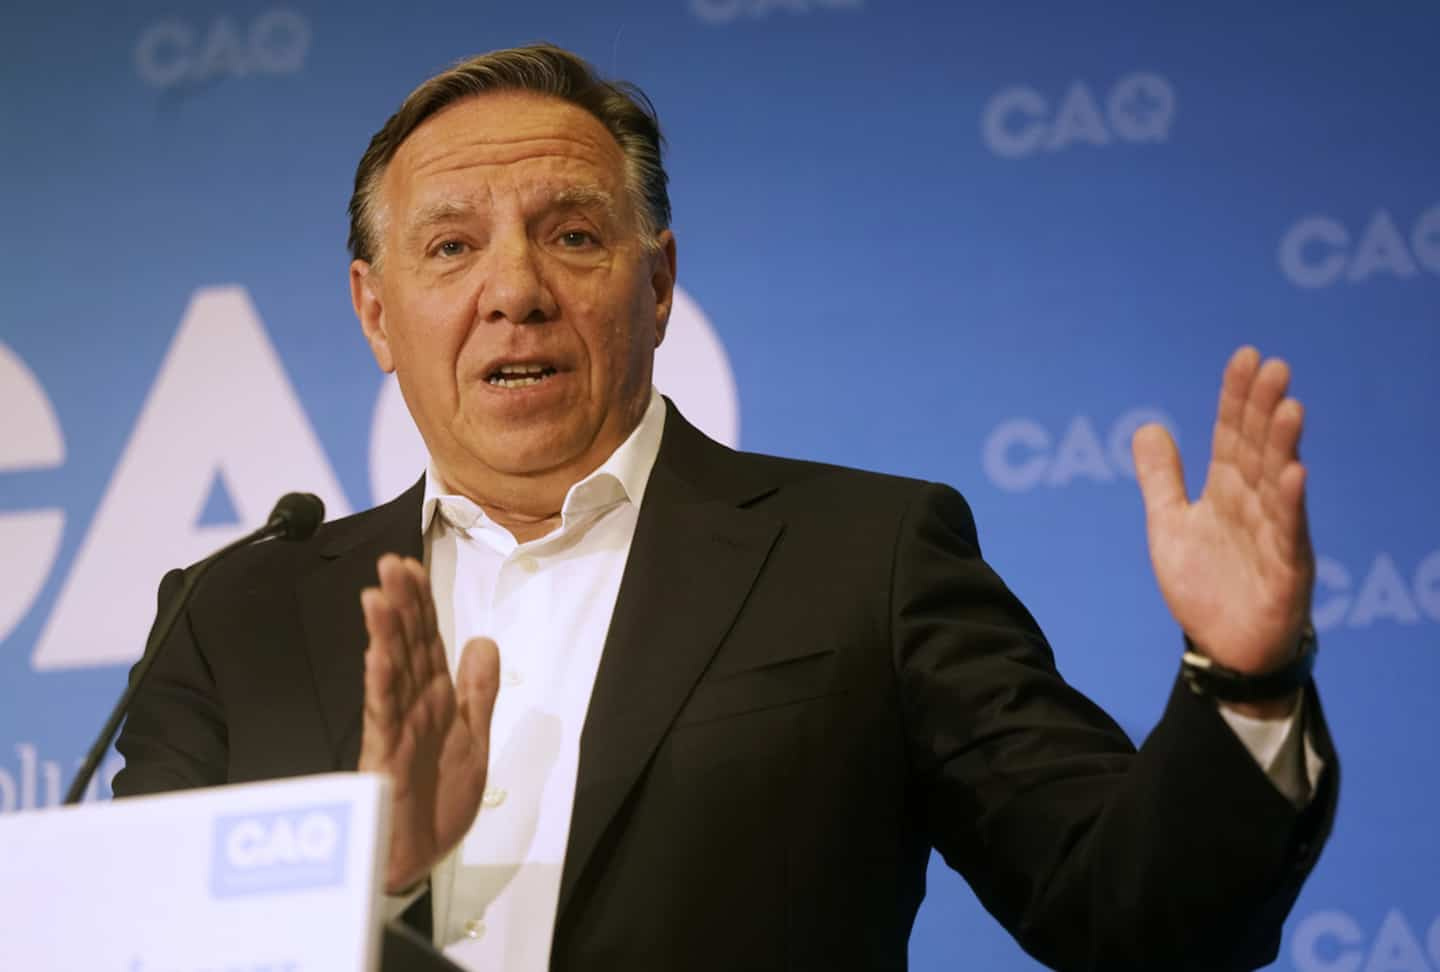 The pope will receive François Legault and his wife in private audience